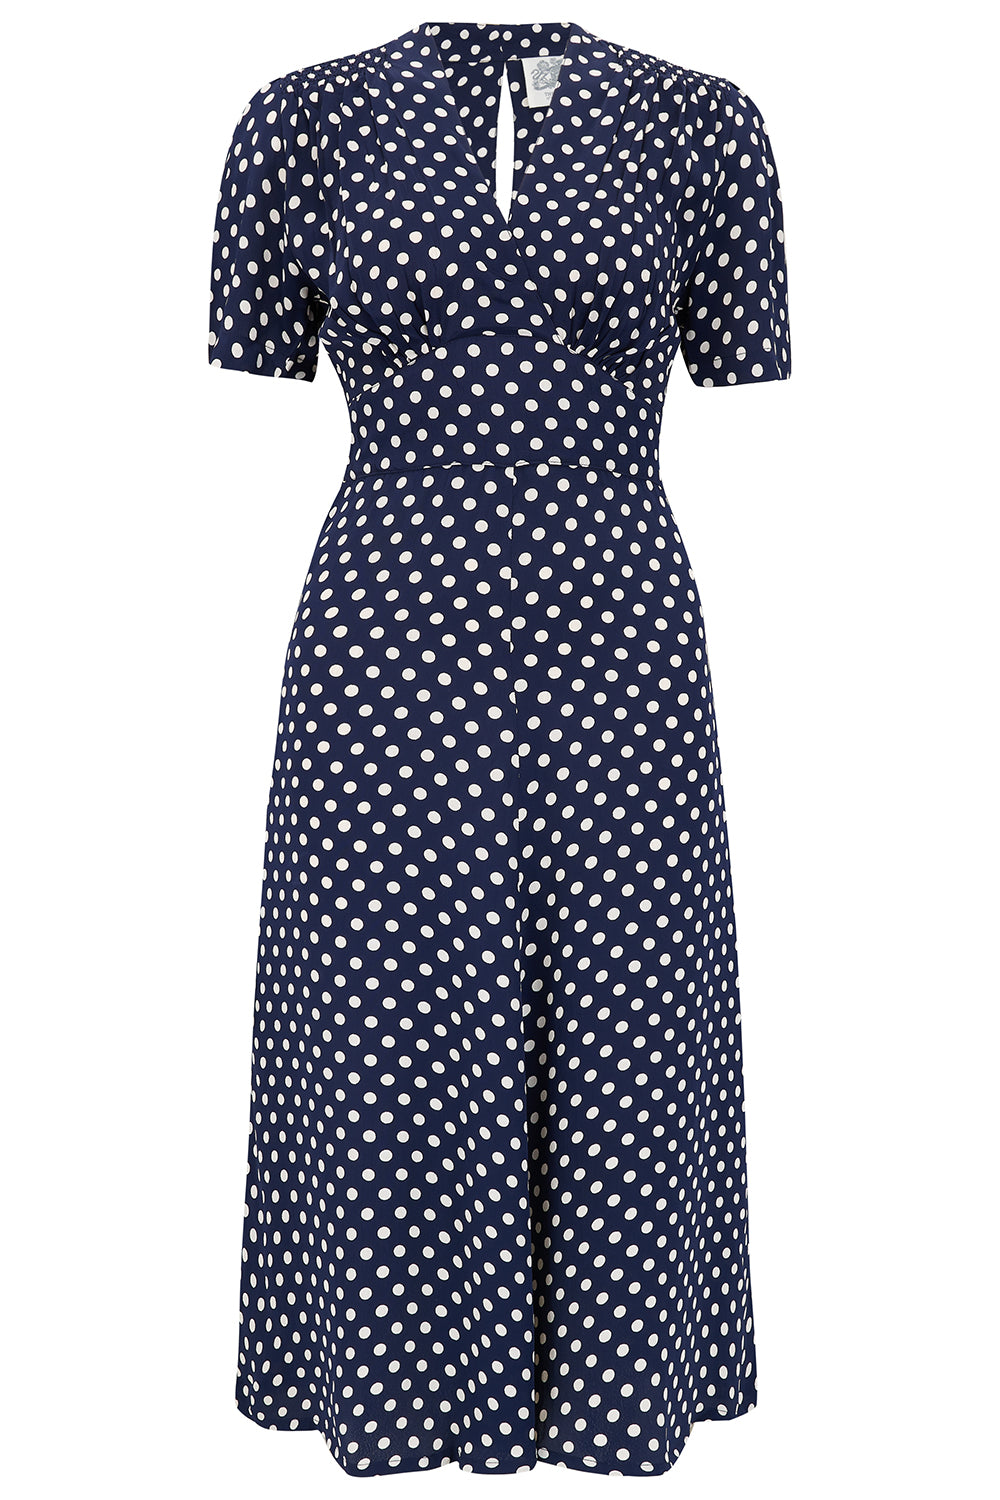 "Dolores" Swing Dress in Navy Spot, Classic 1940s Inspired Vintage Style - True and authentic vintage style clothing, inspired by the Classic styles of CC41 , WW2 and the fun 1950s RocknRoll era, for everyday wear plus events like Goodwood Revival, Twinwood Festival and Viva Las Vegas Rockabilly Weekend Rock n Romance The Seamstress Of Bloomsbury